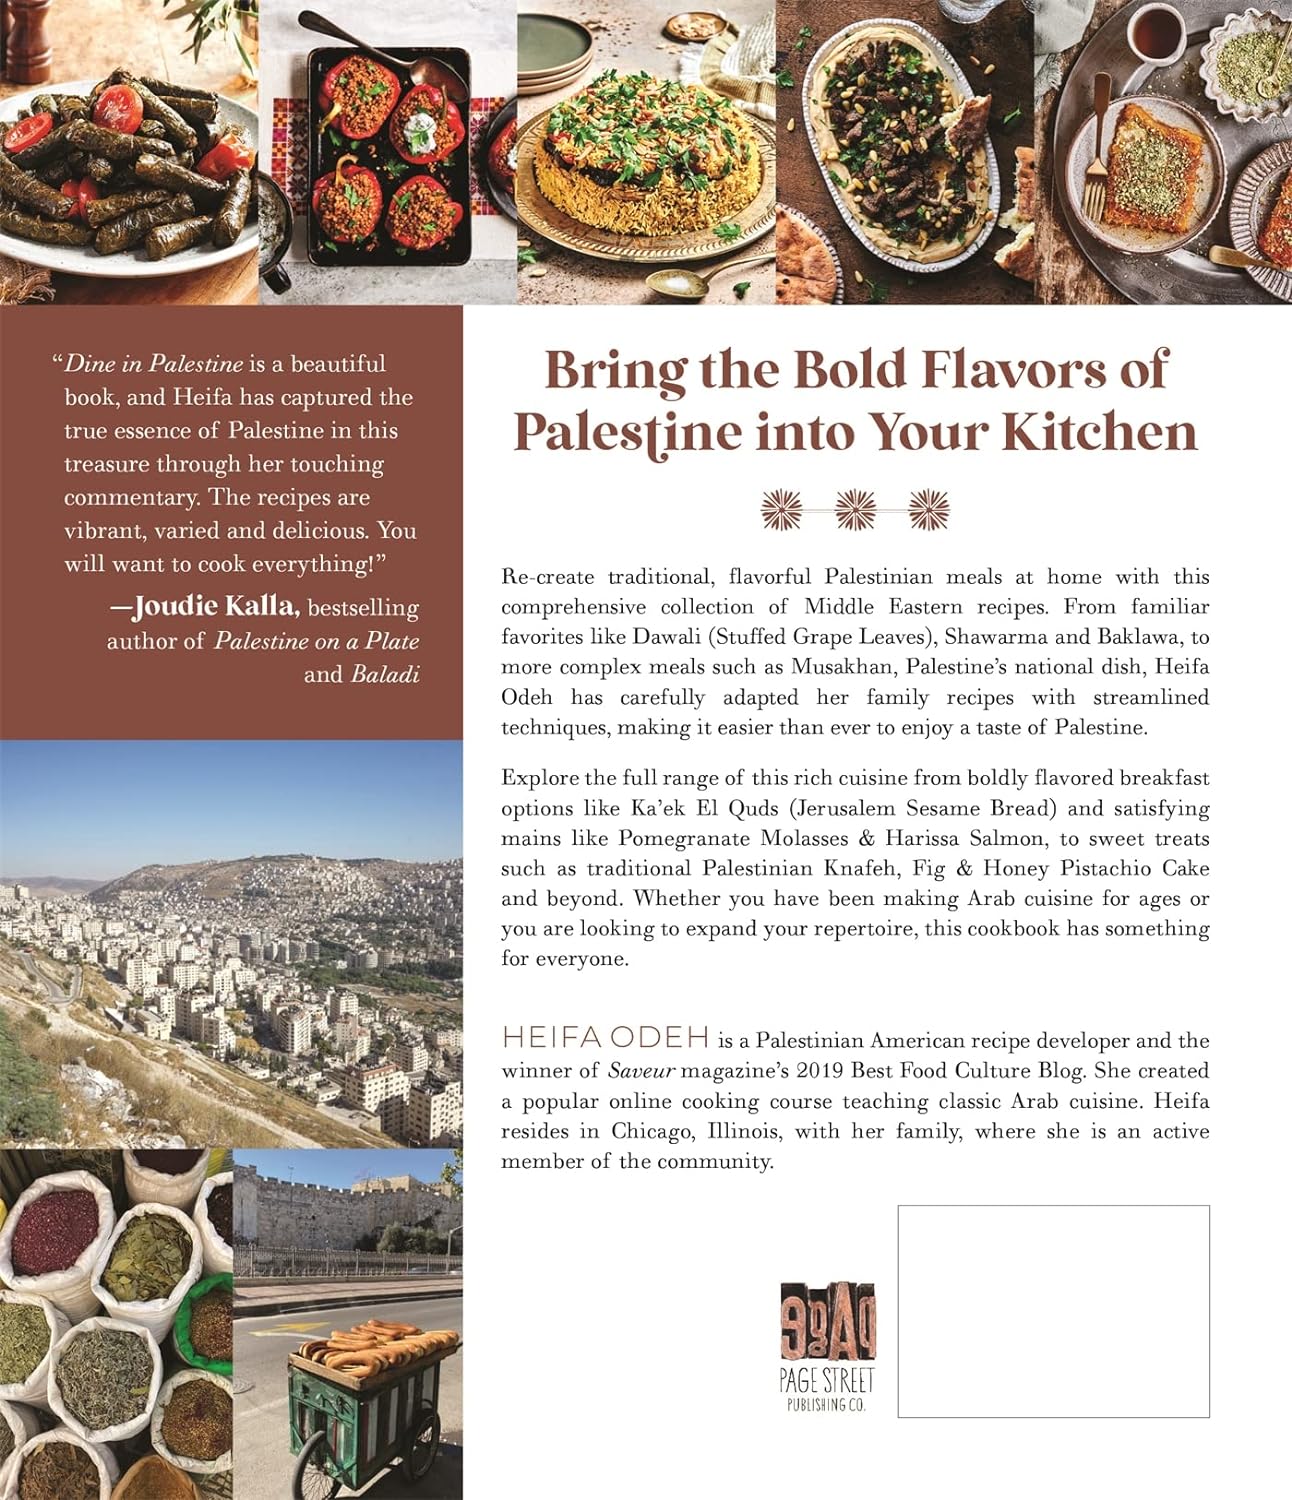 Dine in Palestine: An Authentic Taste of Palestine in 60 Recipes from My Family to Your Table (Heifa Odeh)